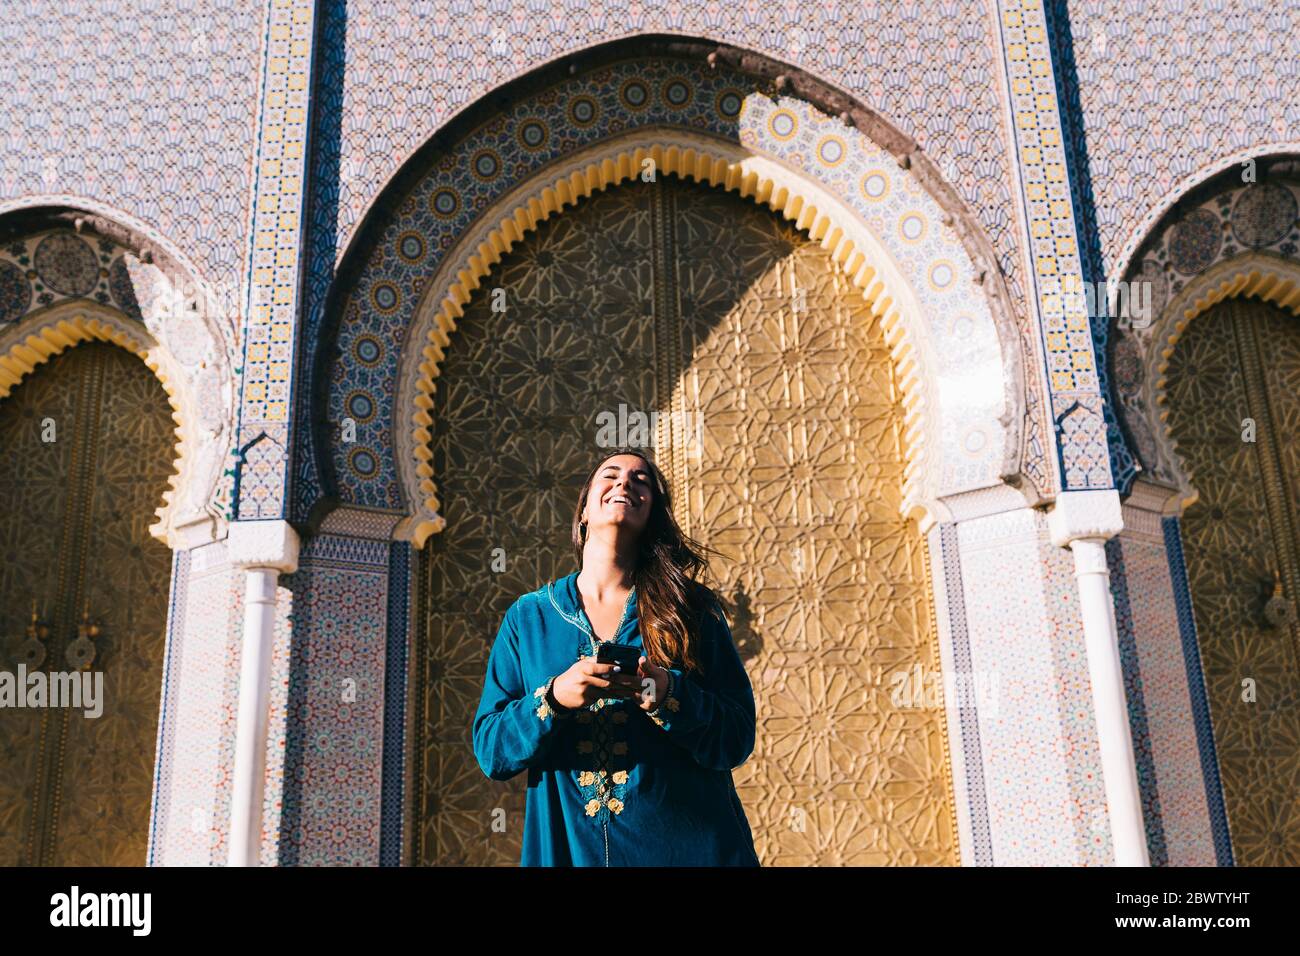 Young woman standing in front of traditional architure wearing Moroccan robe, Morocco Stock Photo